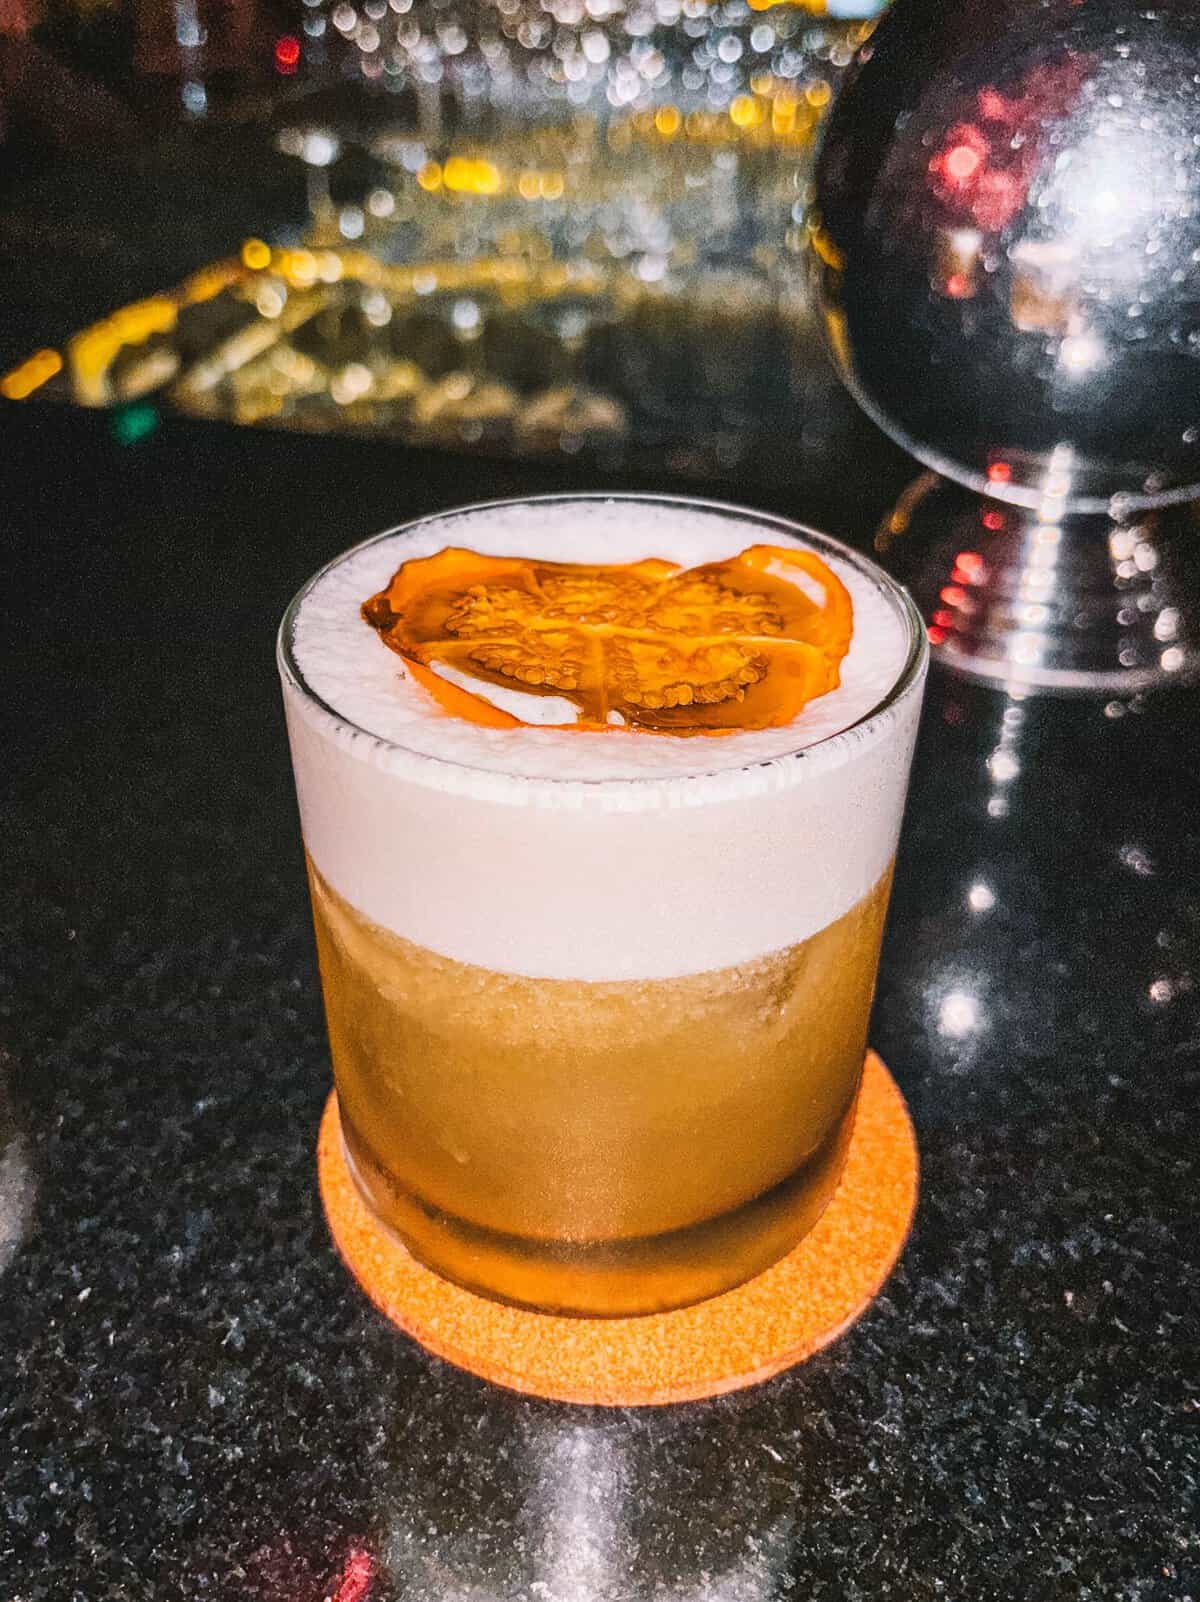 A tasty cocktail from Alquimico. Be sure to add a visit to this bar to your list of things to do in Cartagena Colombia!